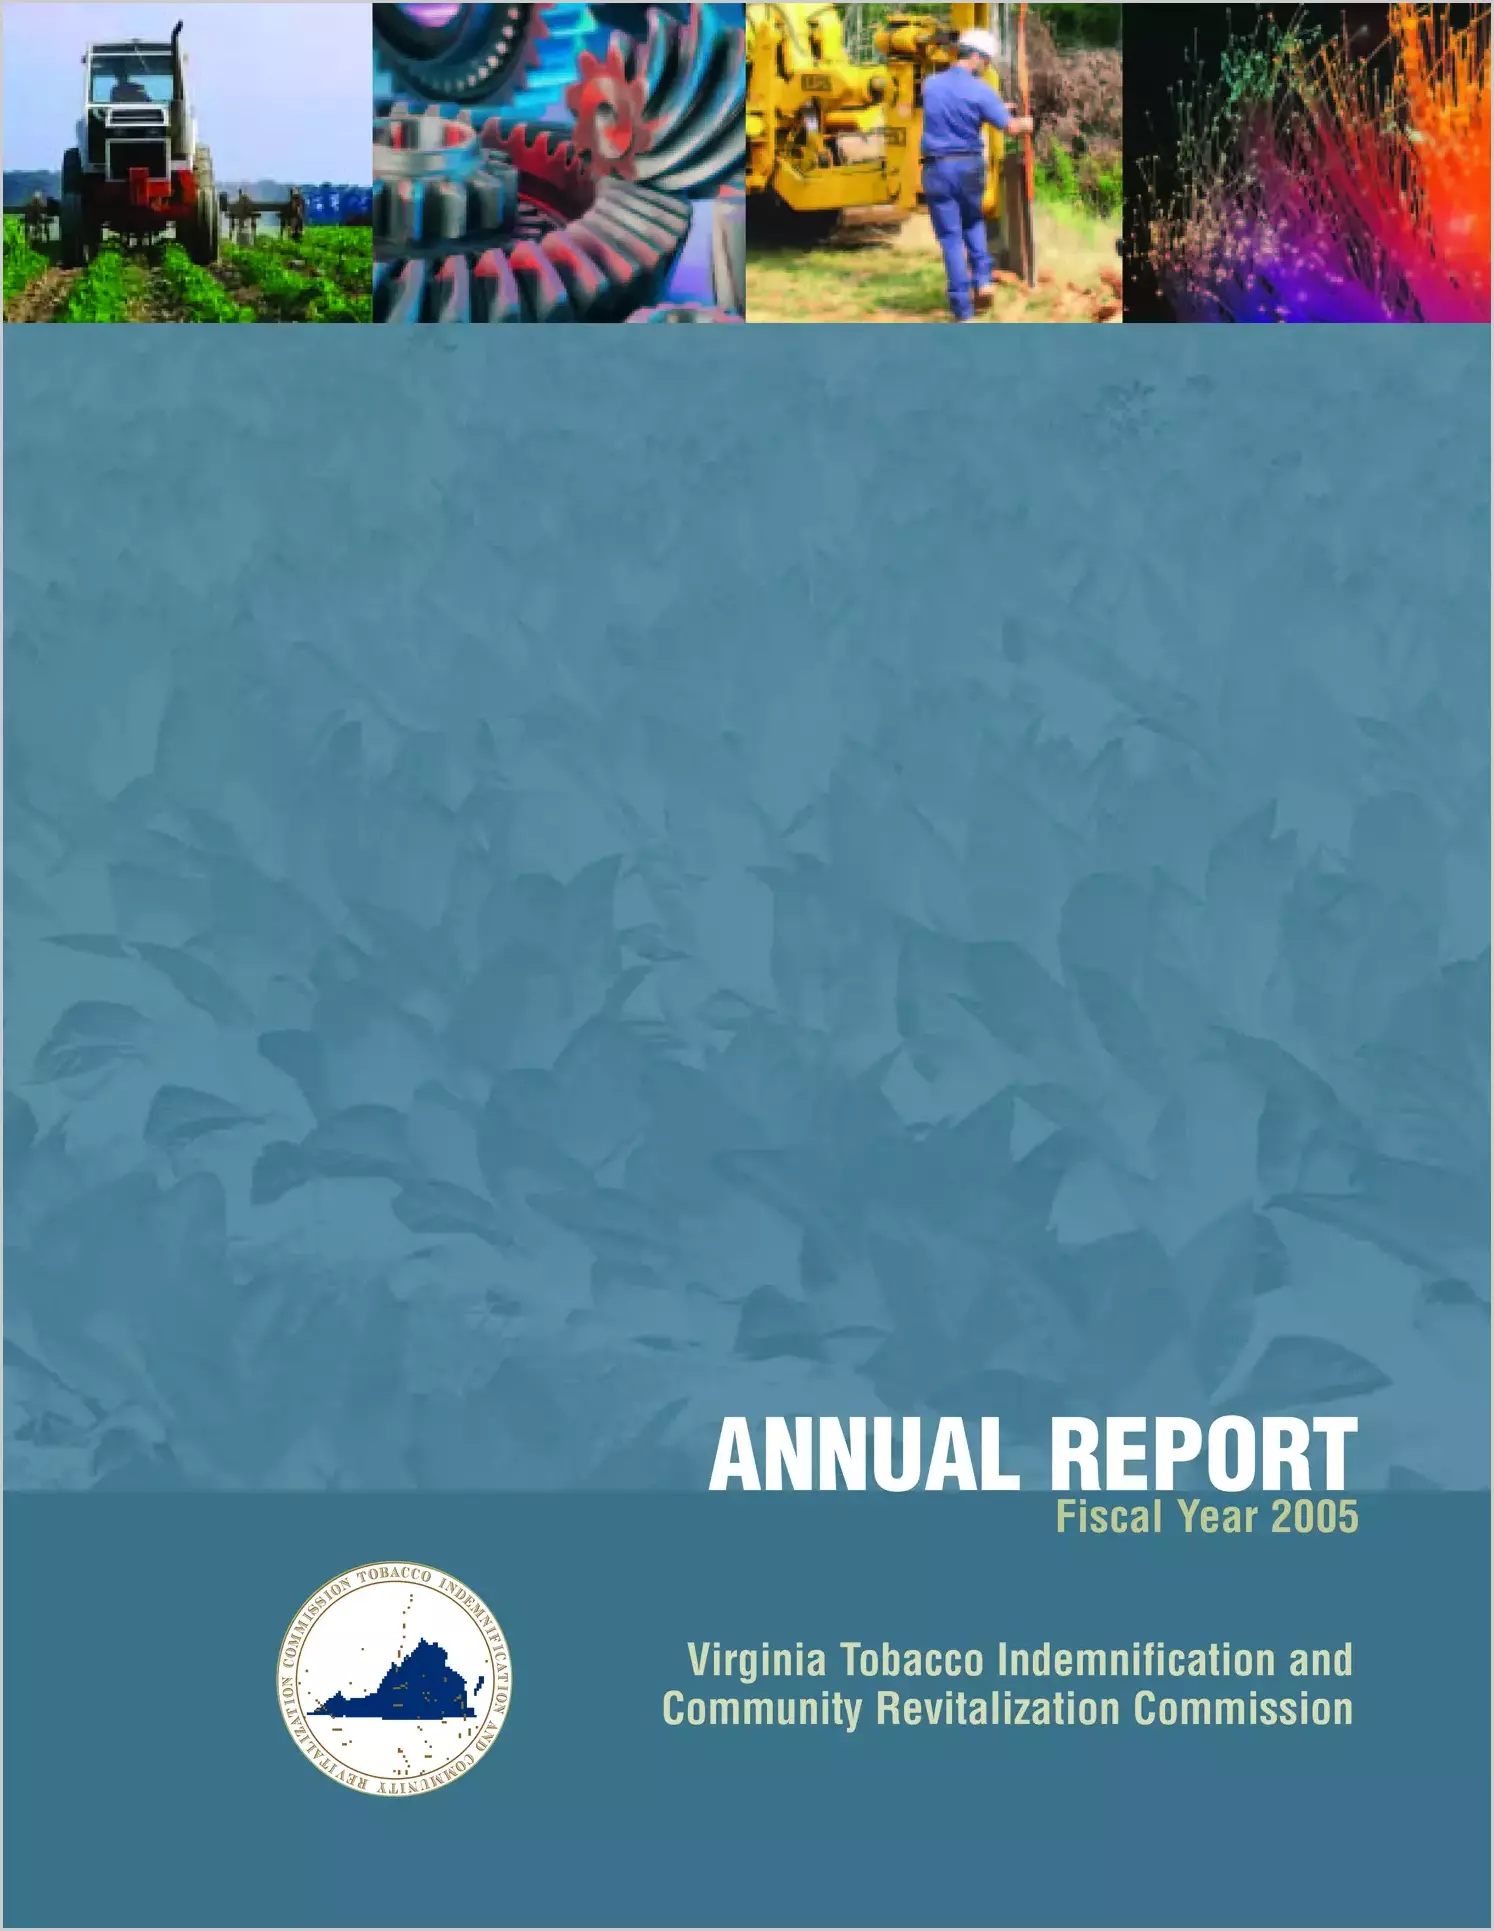 Tobacco Indemnification and Community Revitalization Commission Fiscal Year 2005 Annual Report